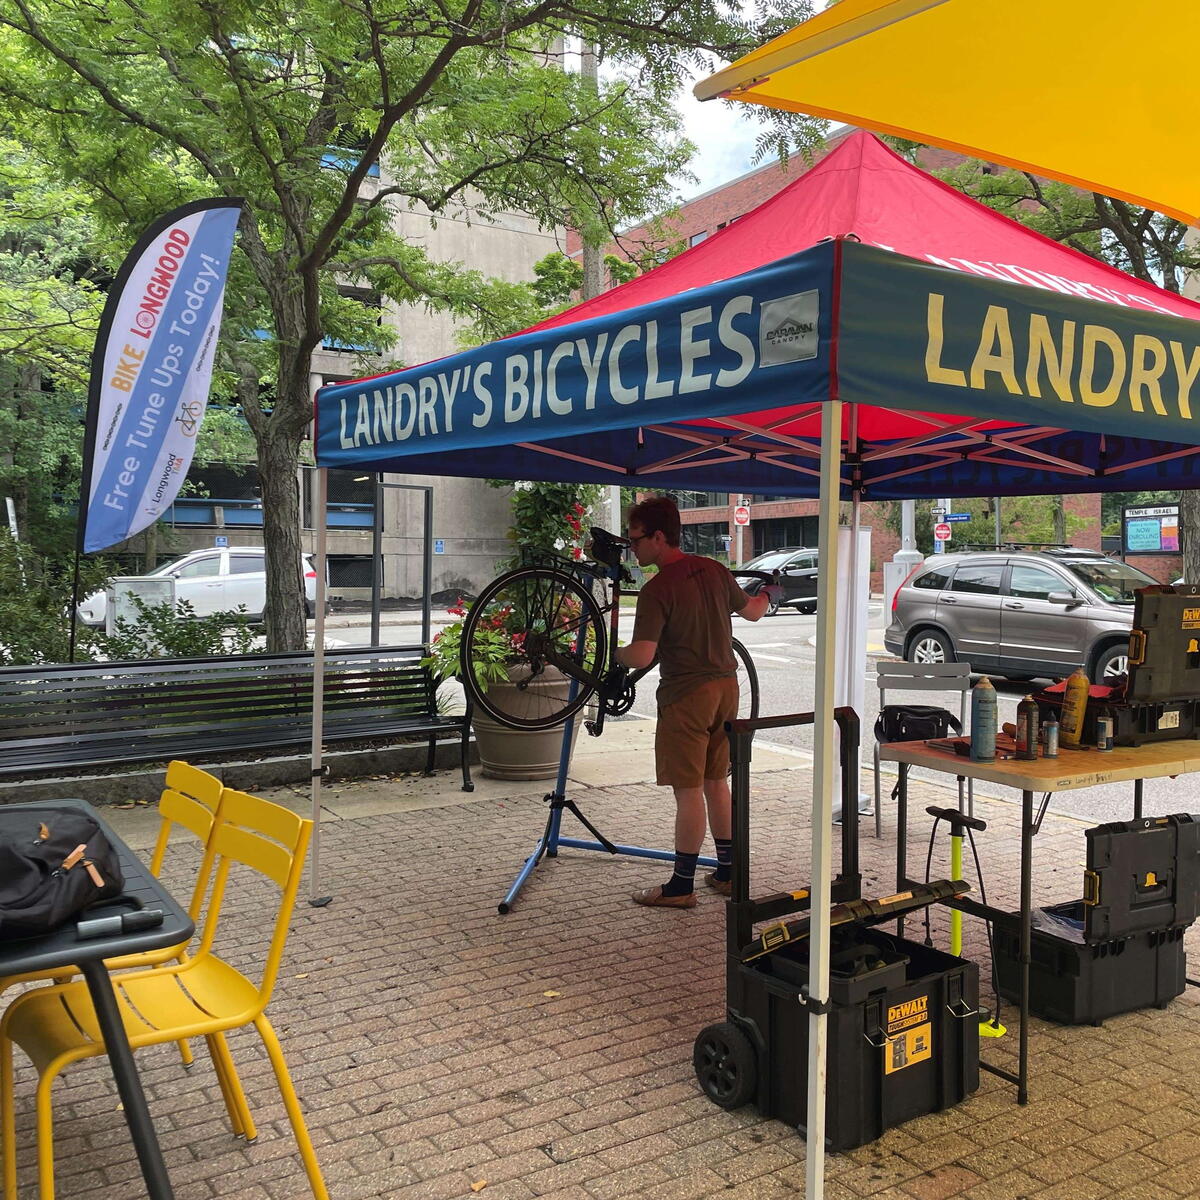 photo of landry's bicycles tent and a worker tuning up a bike